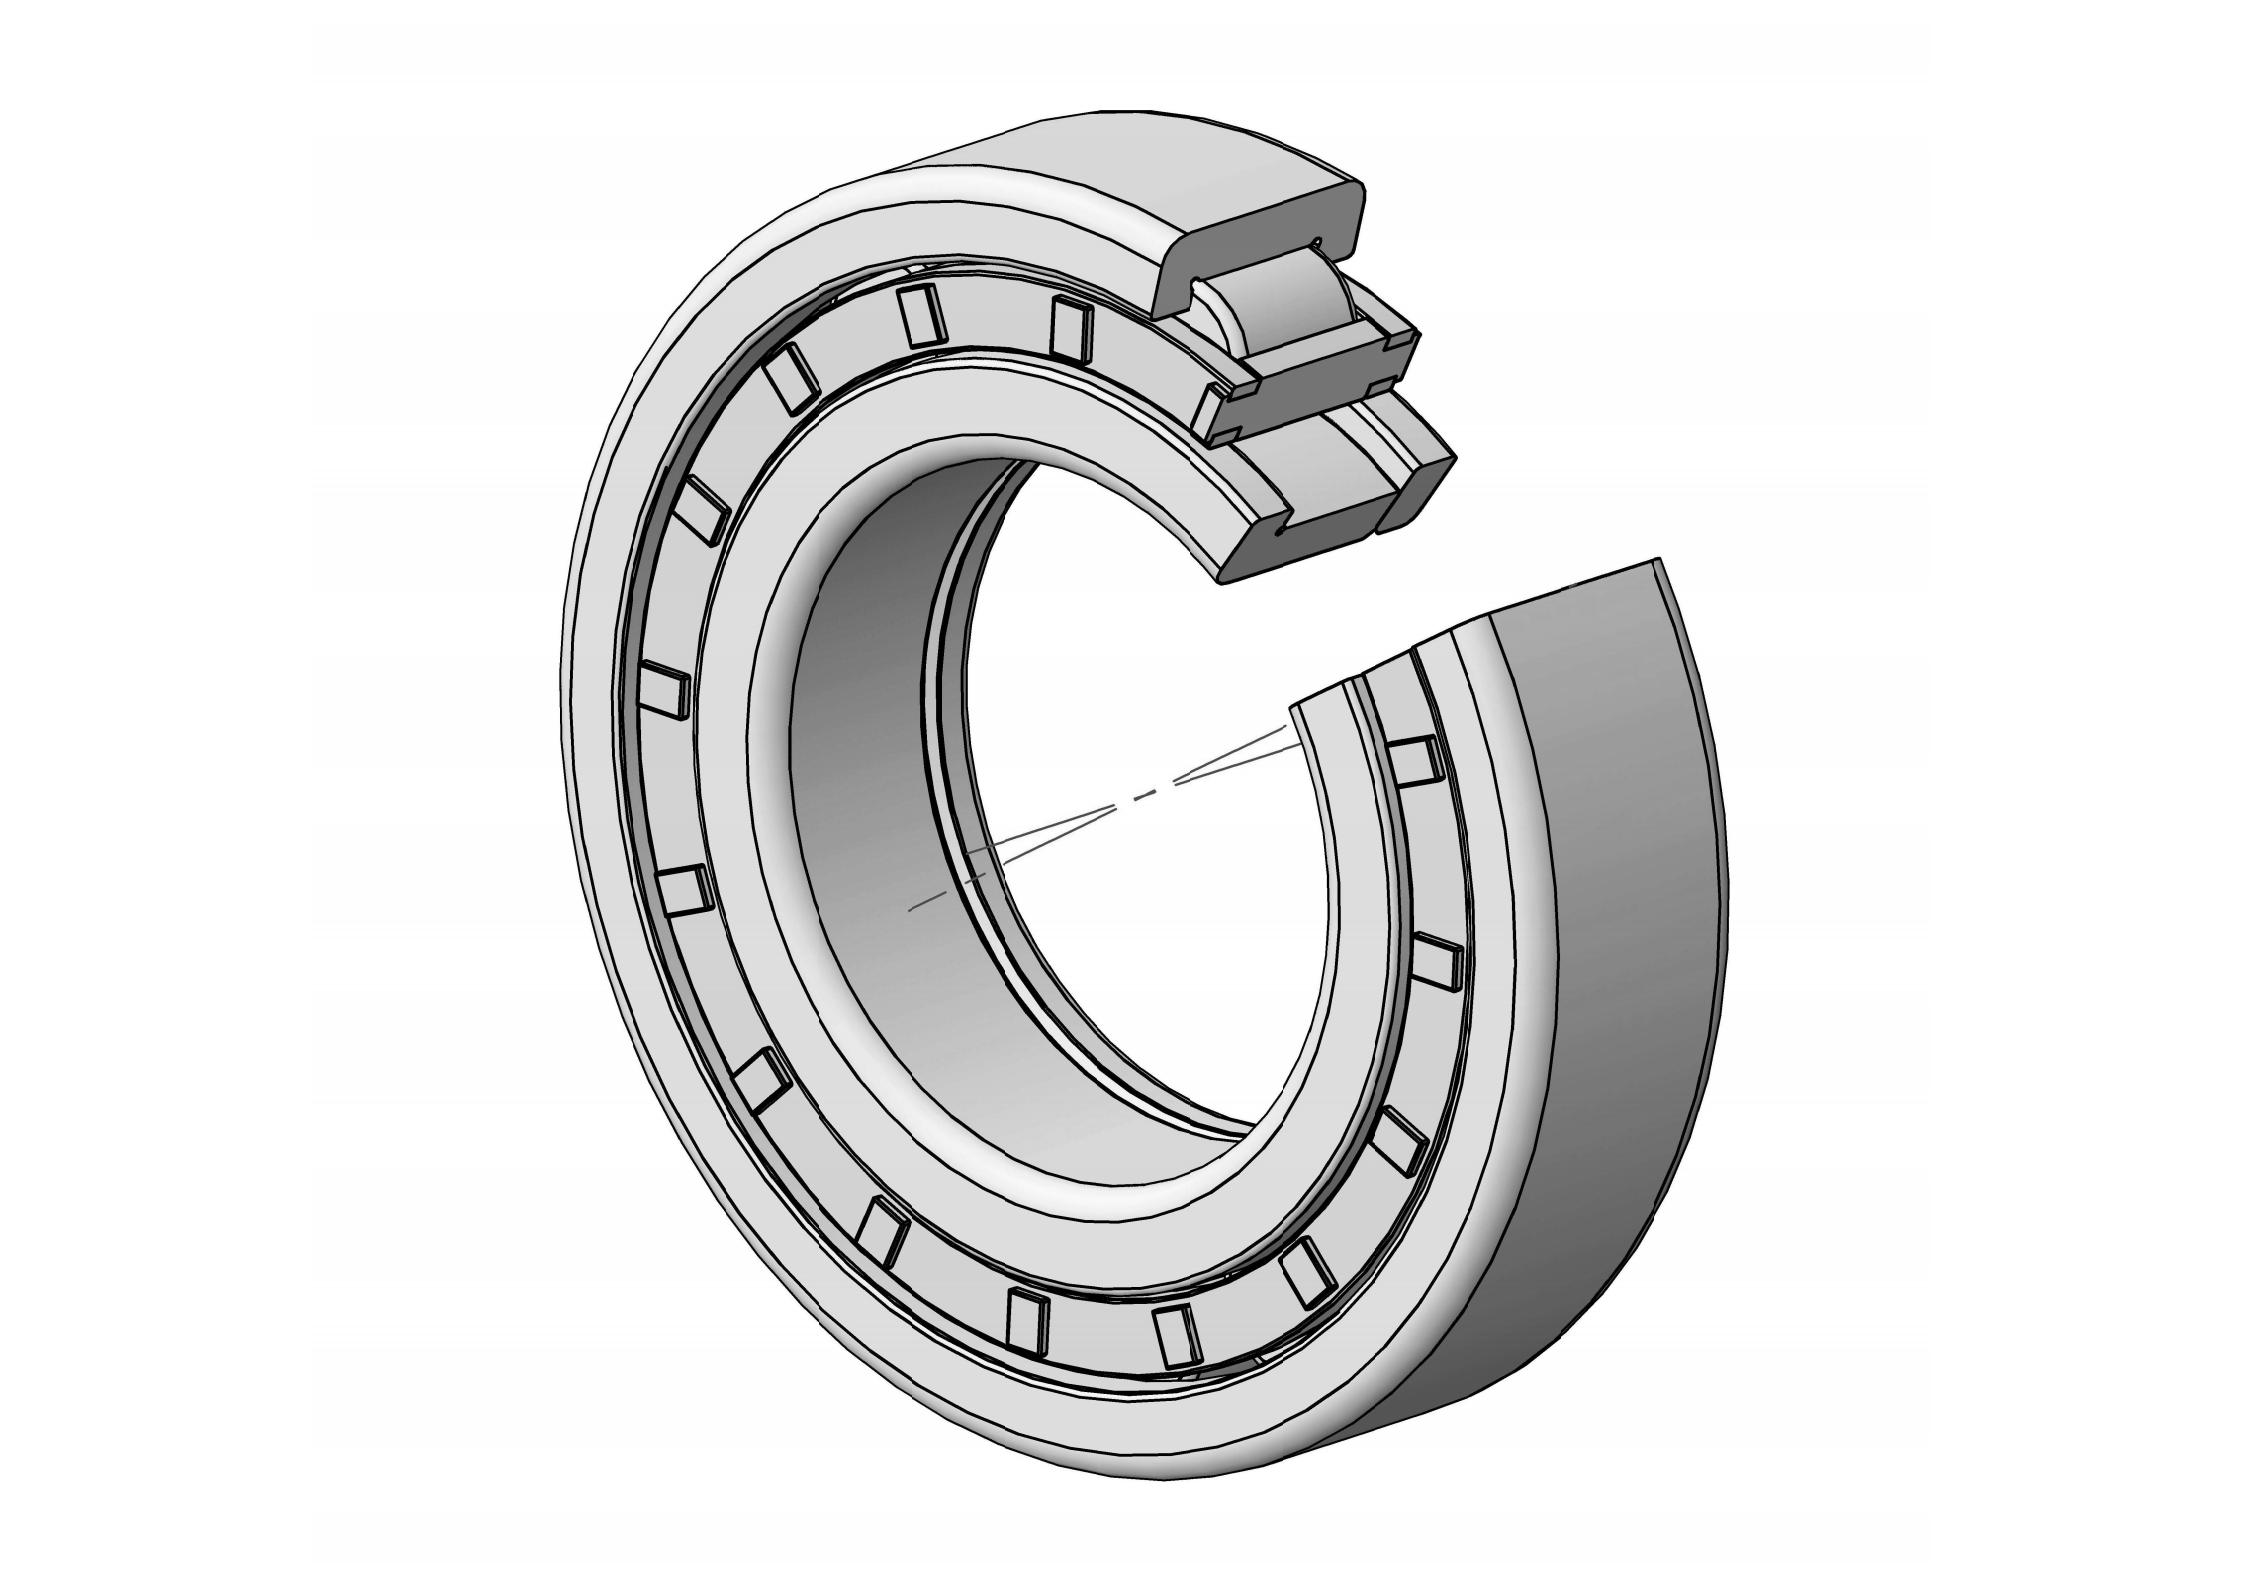 NUP303-E Single Row Cylindrical roller bearing 